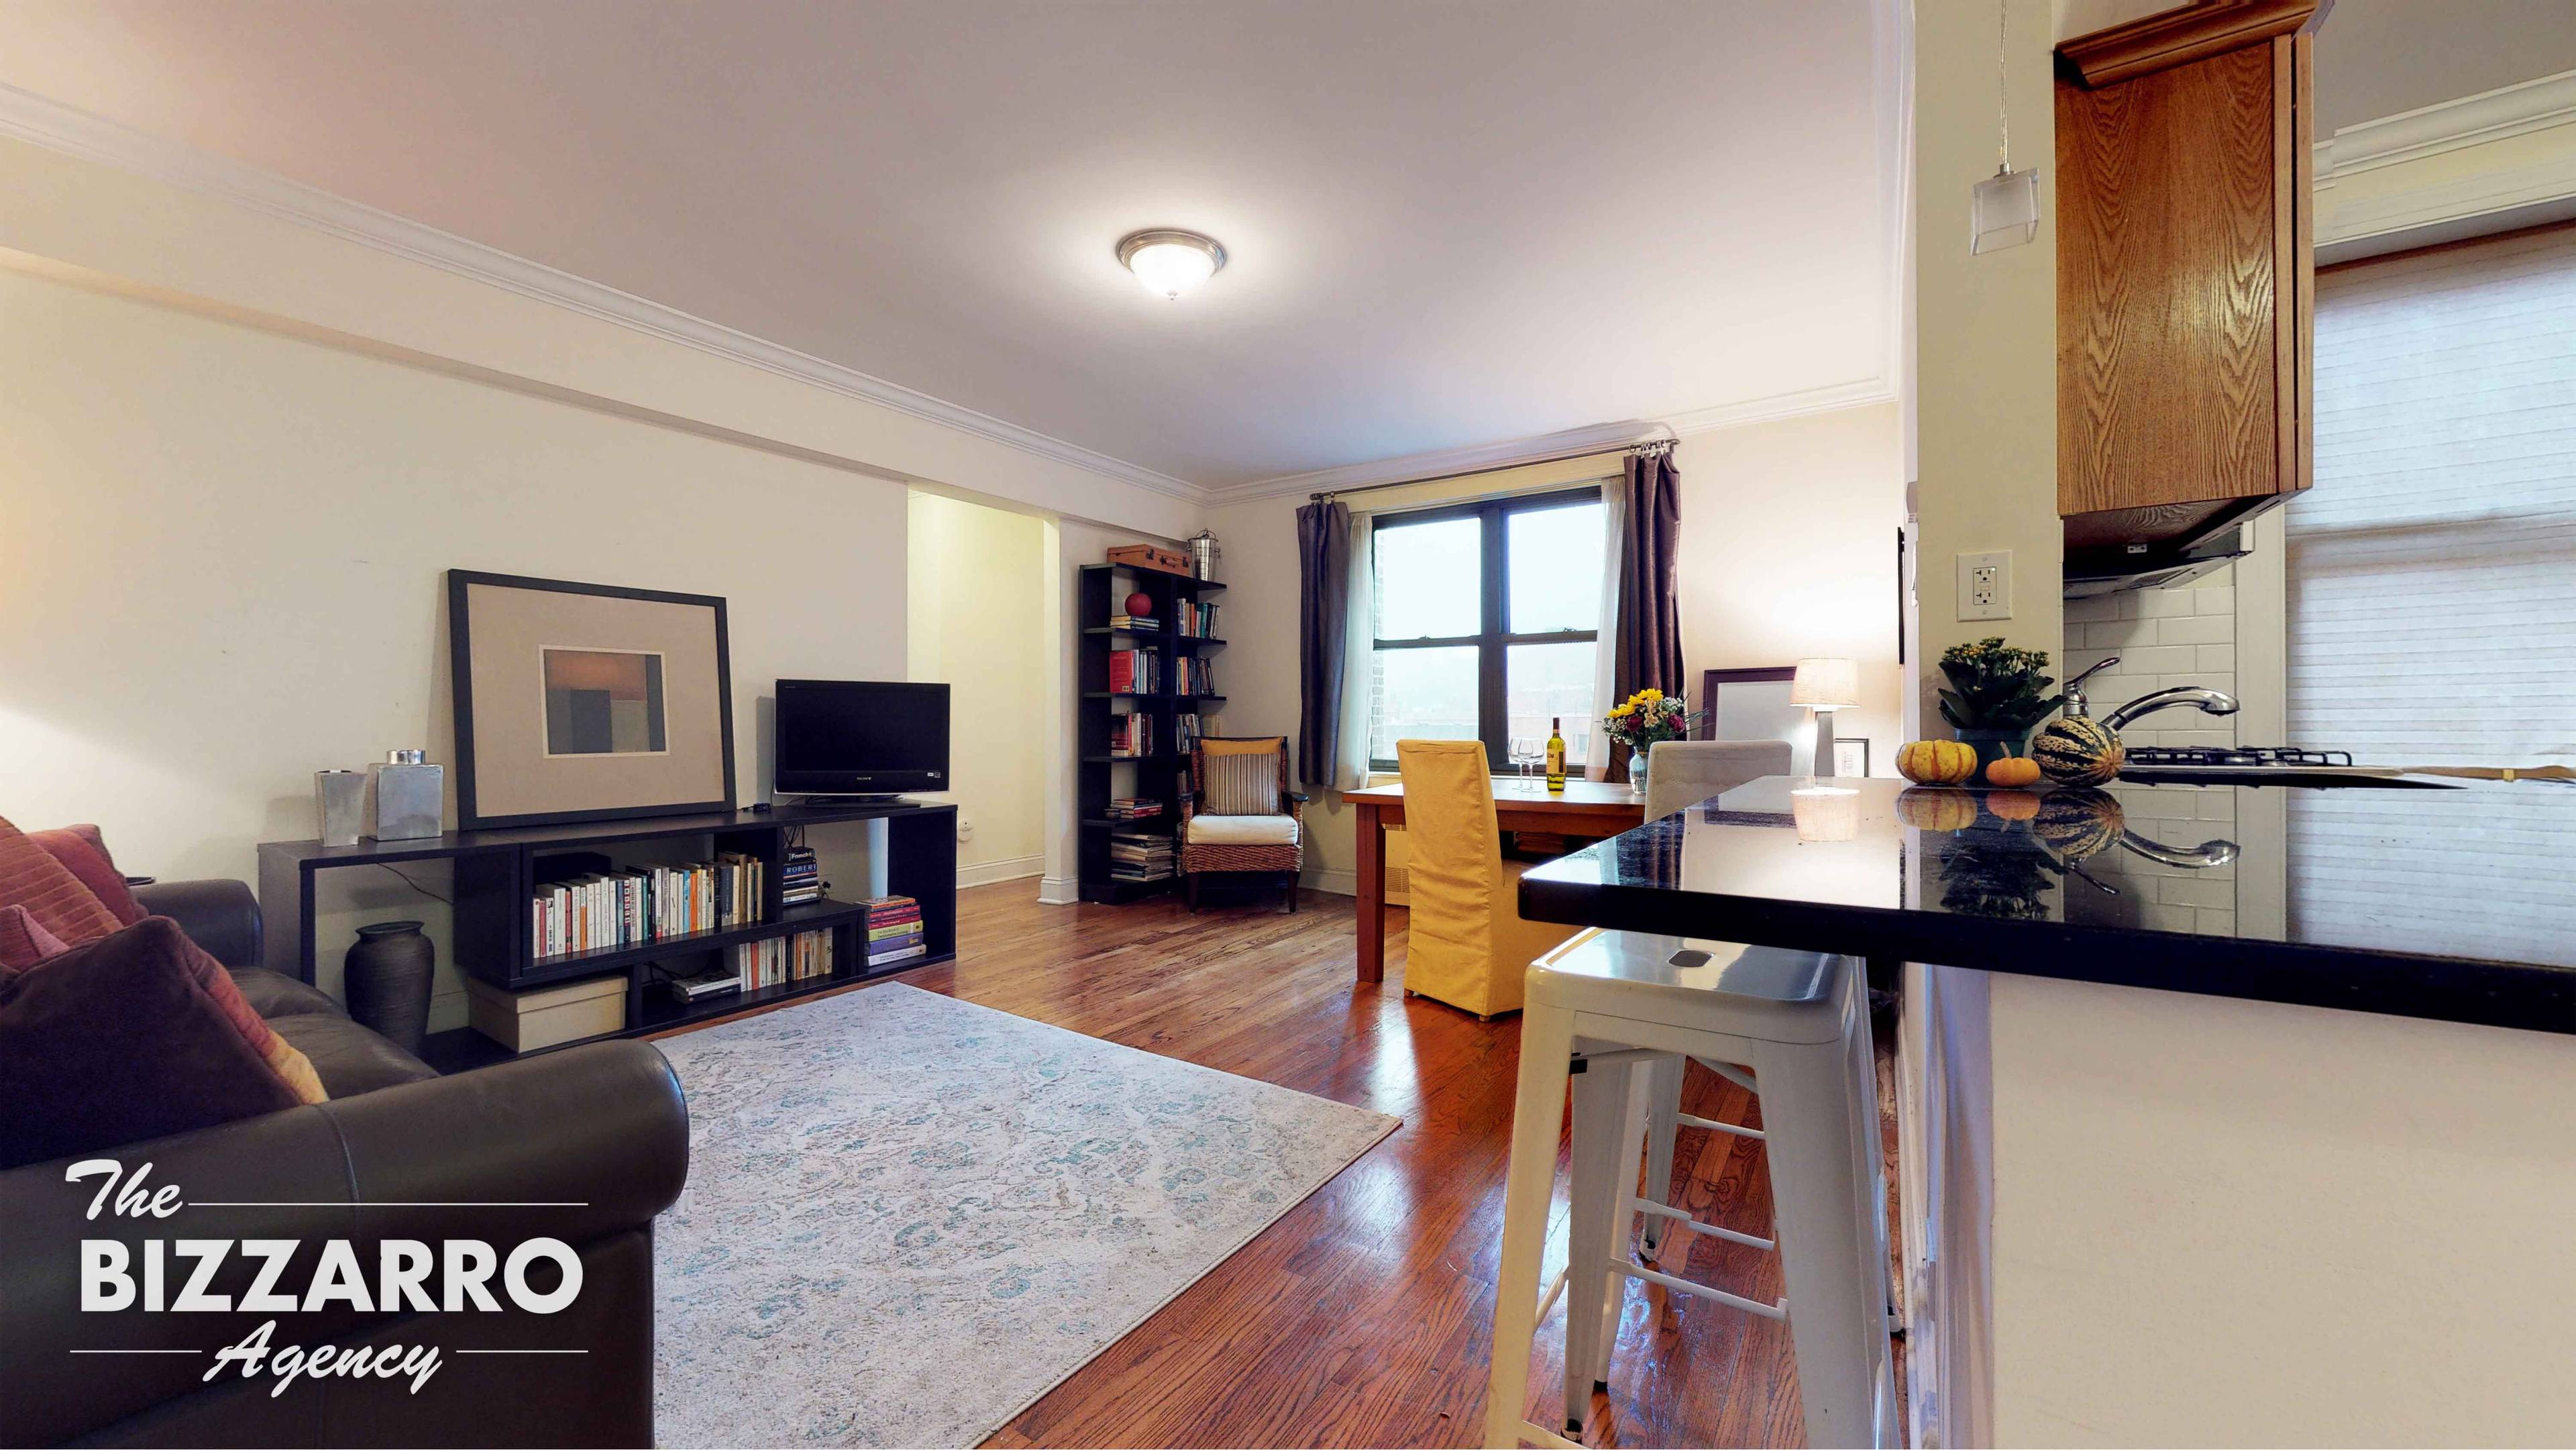 Come enjoy the serenity of this one bedroom gem located at the base of Fort Tryon Park.